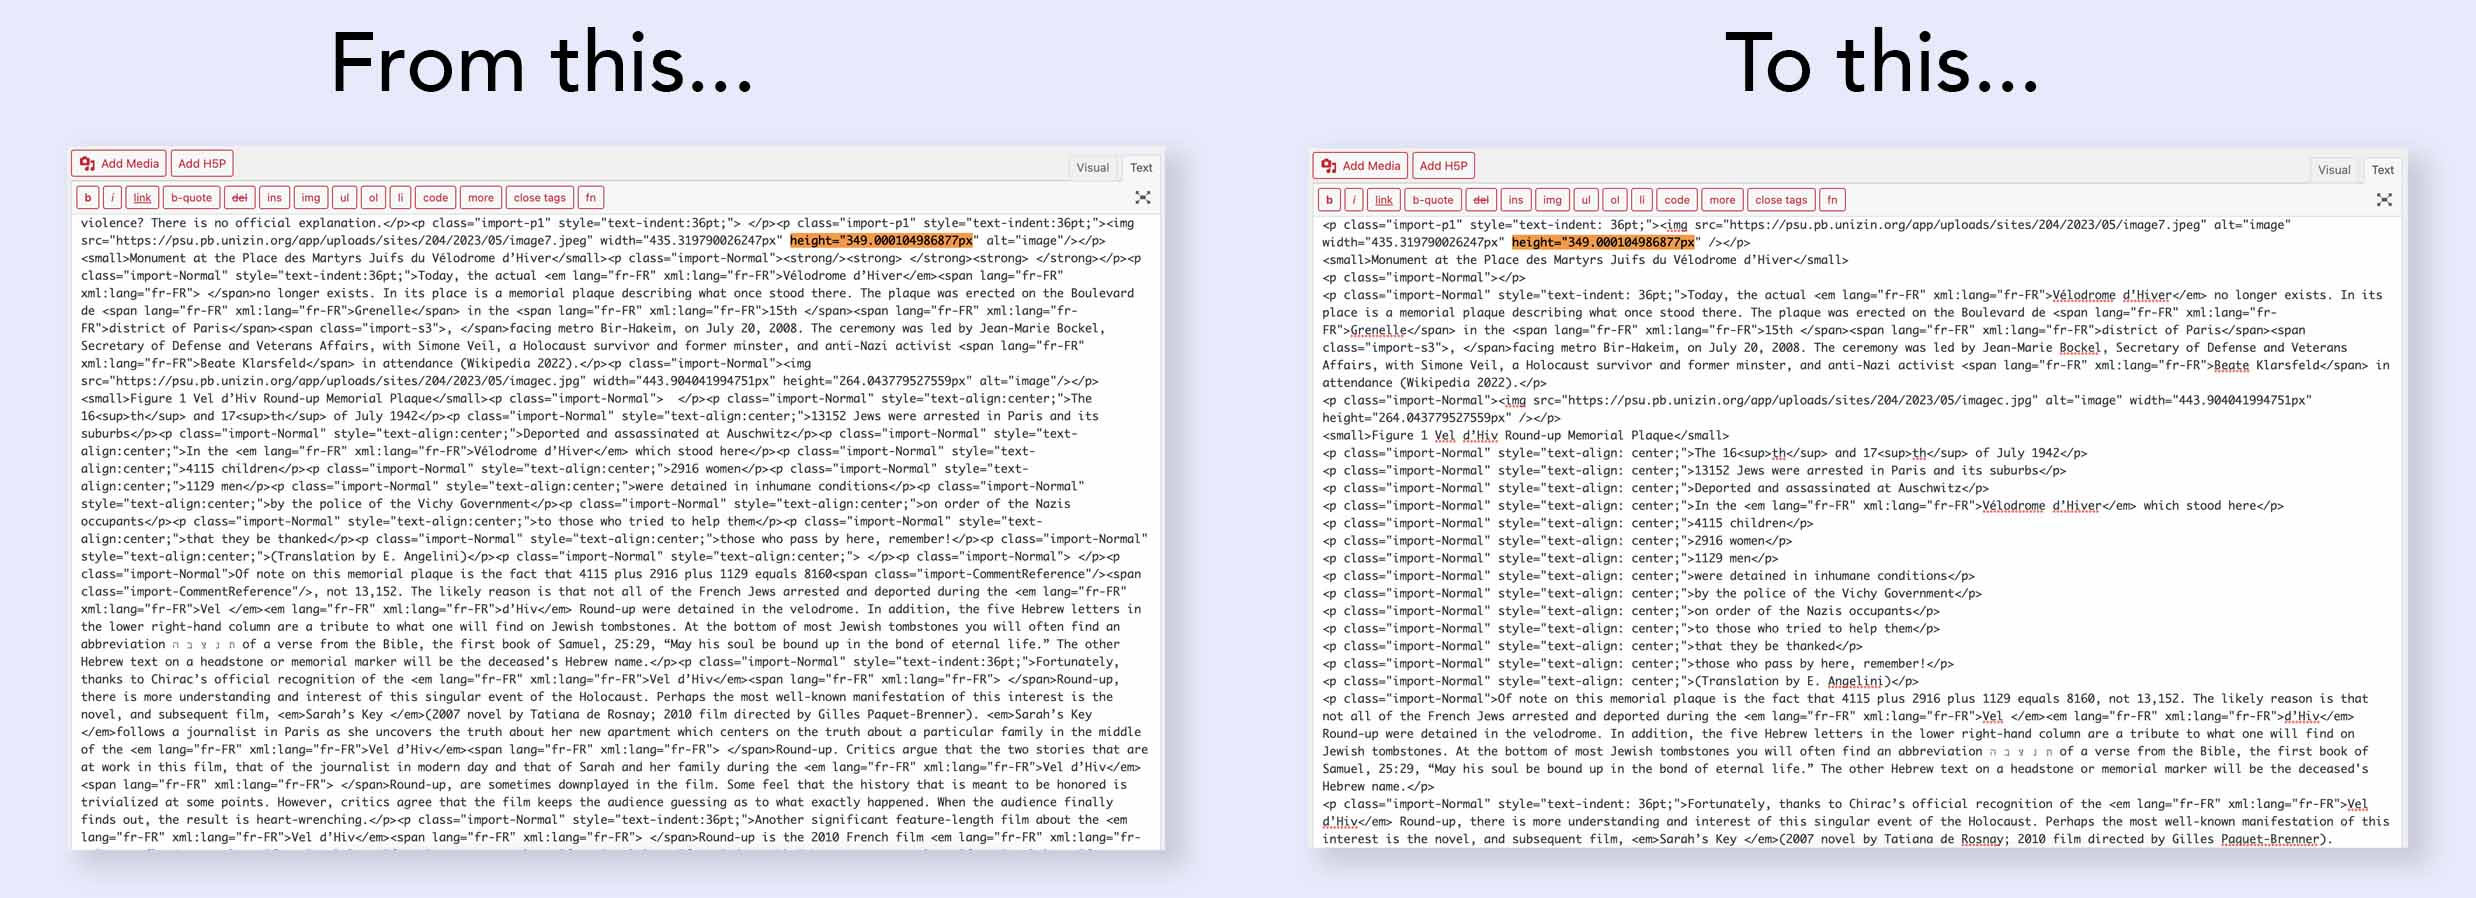 Screen grab from Pressbooks' editor shows unformatted HTML versus formatted